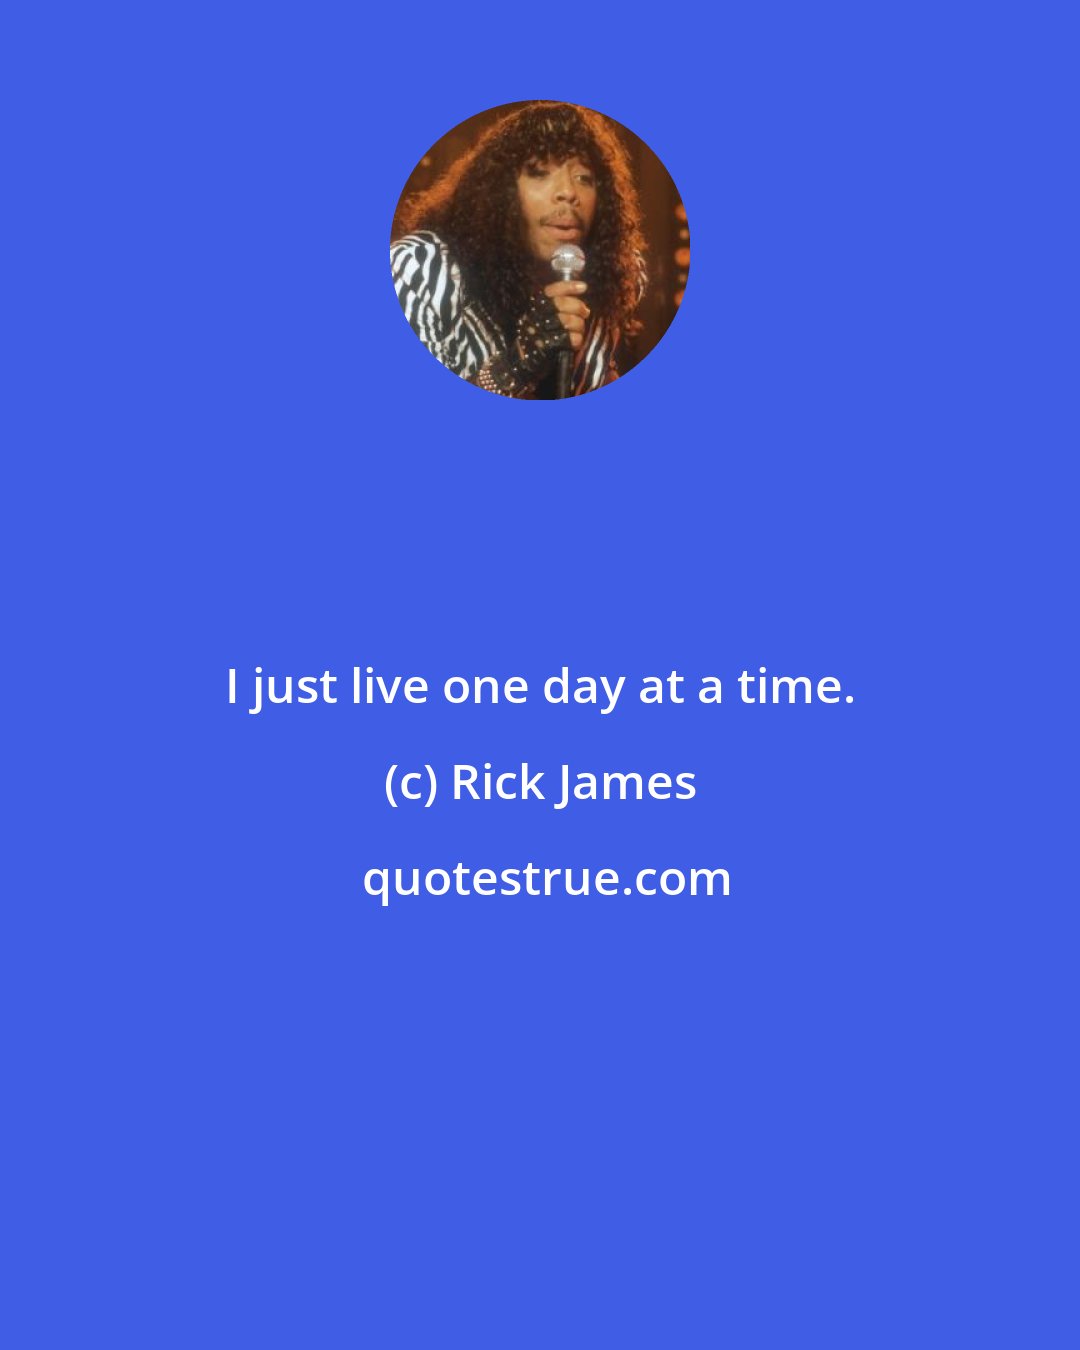 Rick James: I just live one day at a time.